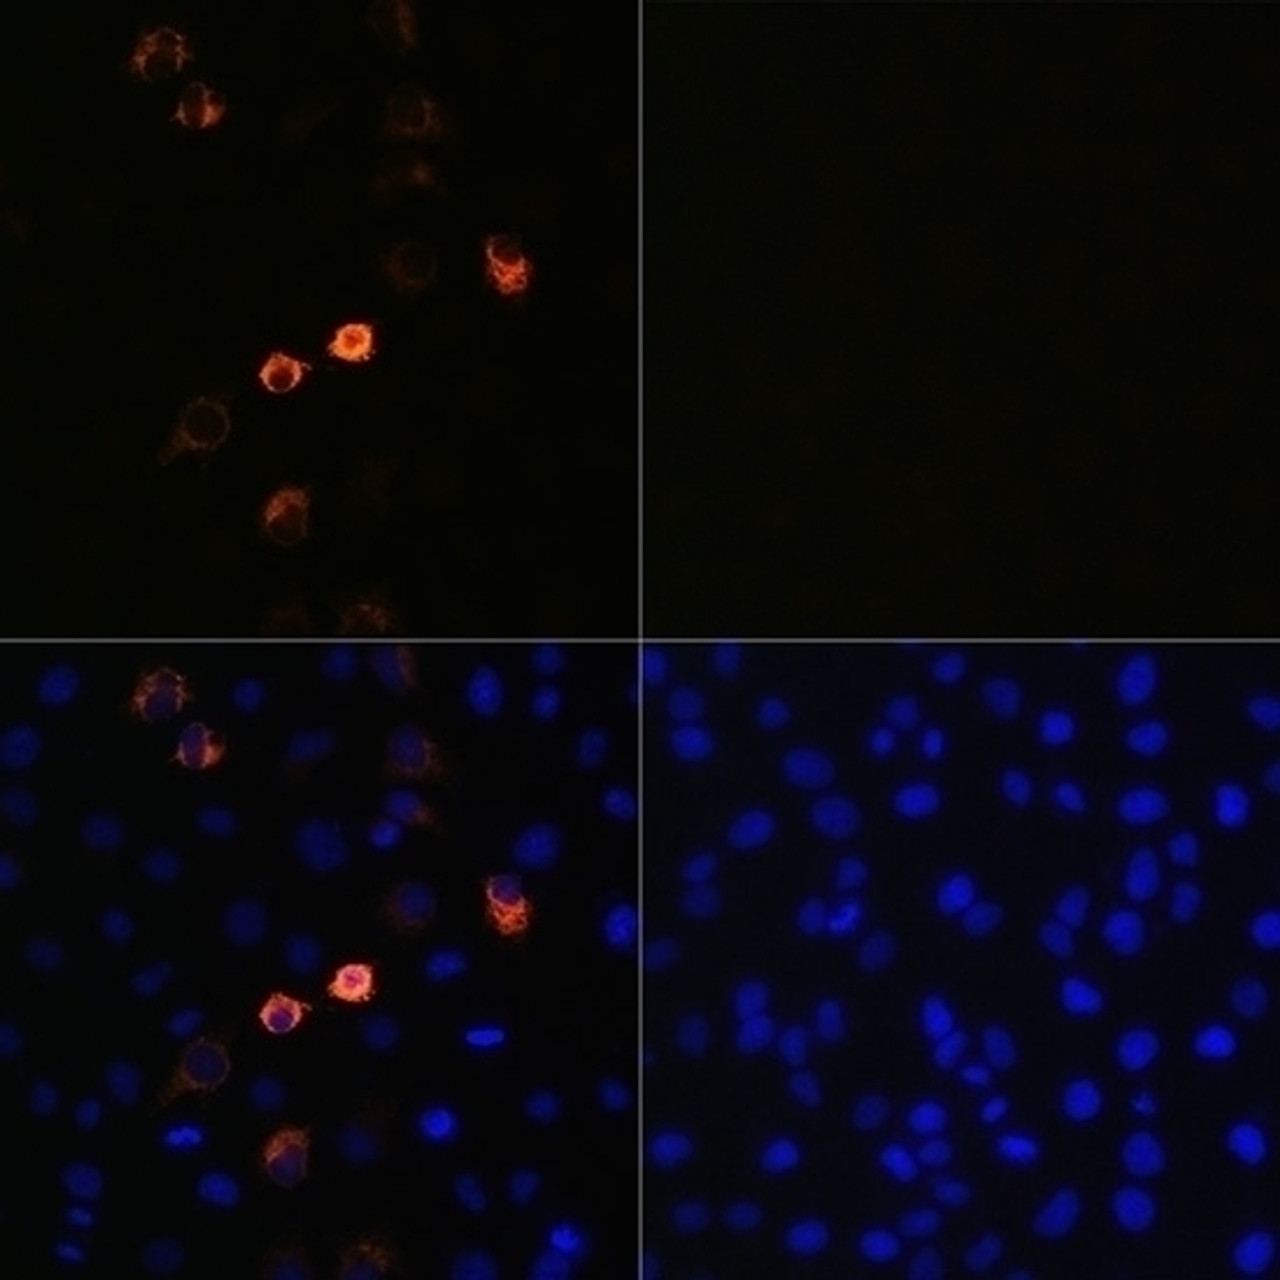 <strong>Figure 1 Immunofluorescence Validation of SARS-CoV-2 (COVID-19) Spike in HeLa cells</strong><br>
Immunofluorescence analysis of HeLa cells, untreated (right) and SARS-CoV-2 (COVID-19) spike plasmid transfected (left) using SARS-CoV-2 (COVID-19) spike antibody, 24-032, at 1:100 dilution. Blue: DAPI for nuclear staining.